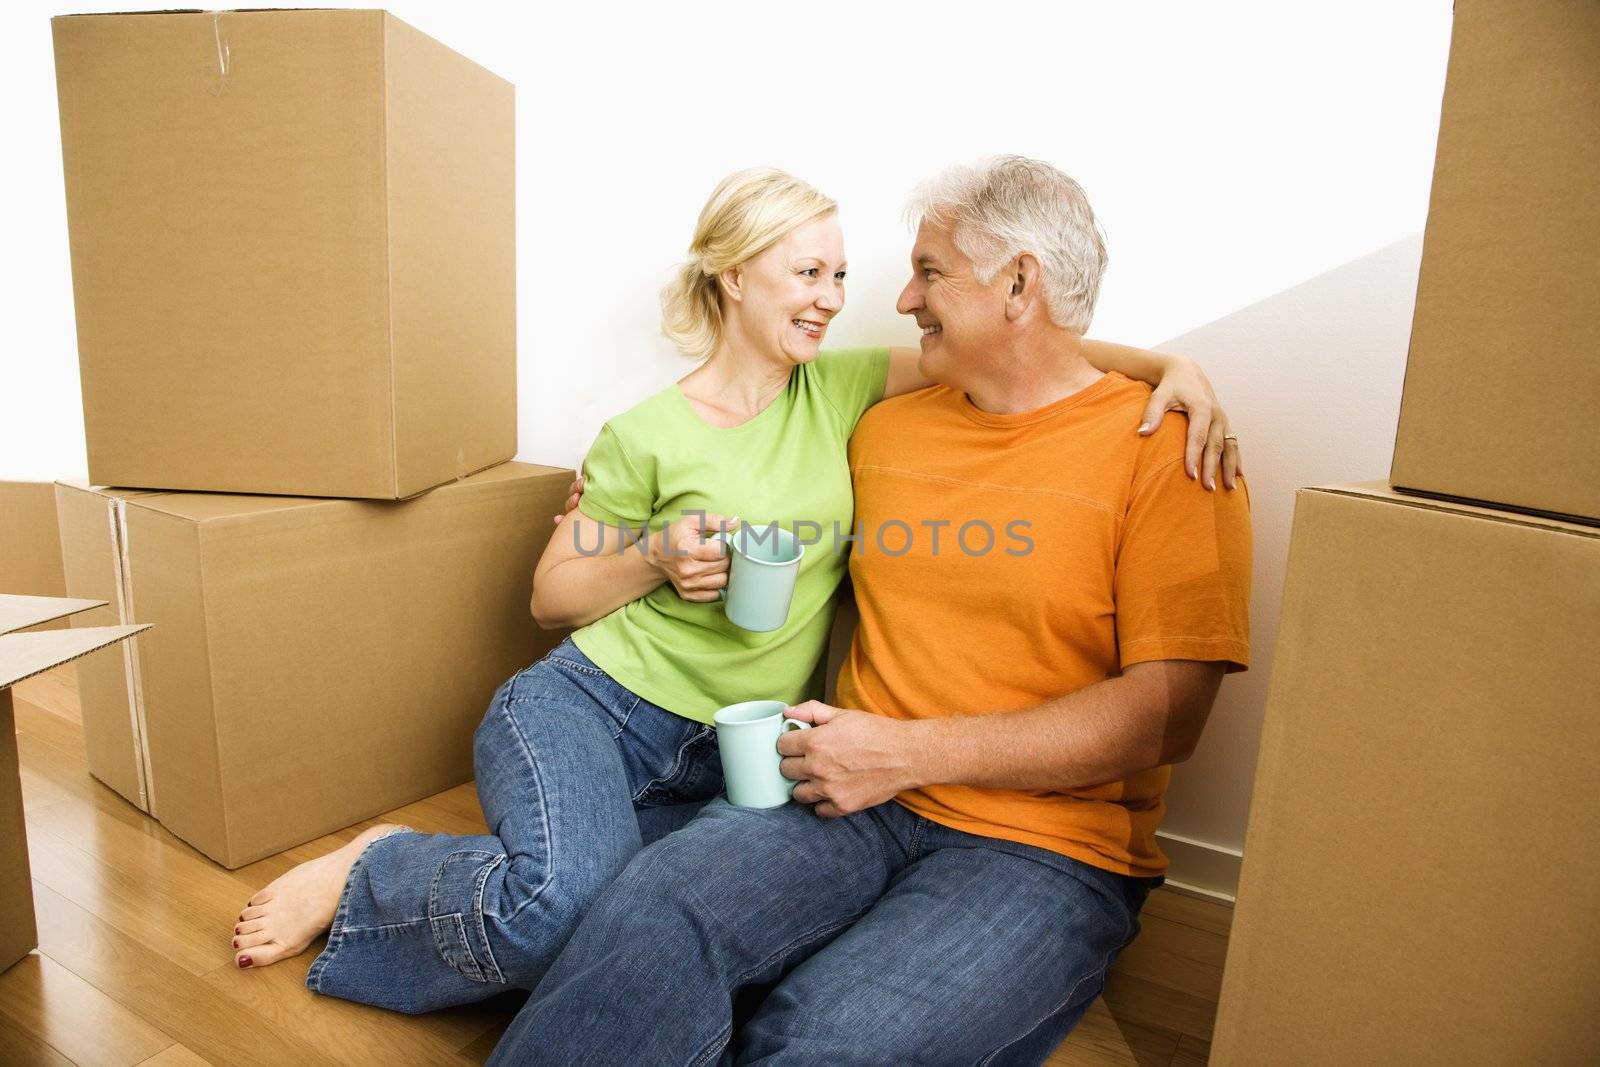 Middle-aged couple sitting on floor among cardboard moving boxes drinking coffee.